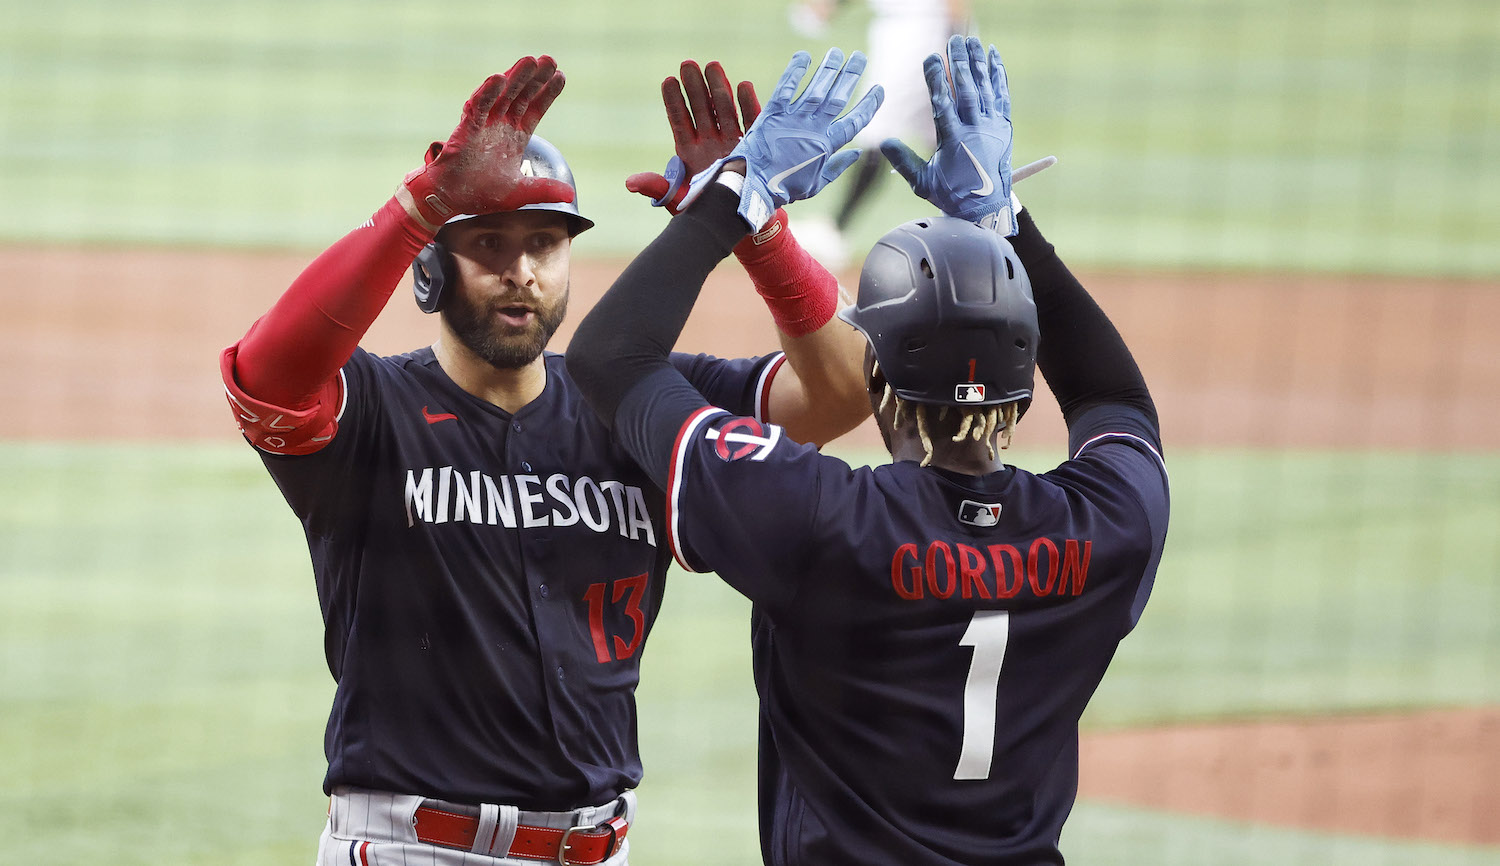 Twins 11, Marlins 1 Offense Explodes with 4 Home Runs and Mahle Cruises in Win - Twins